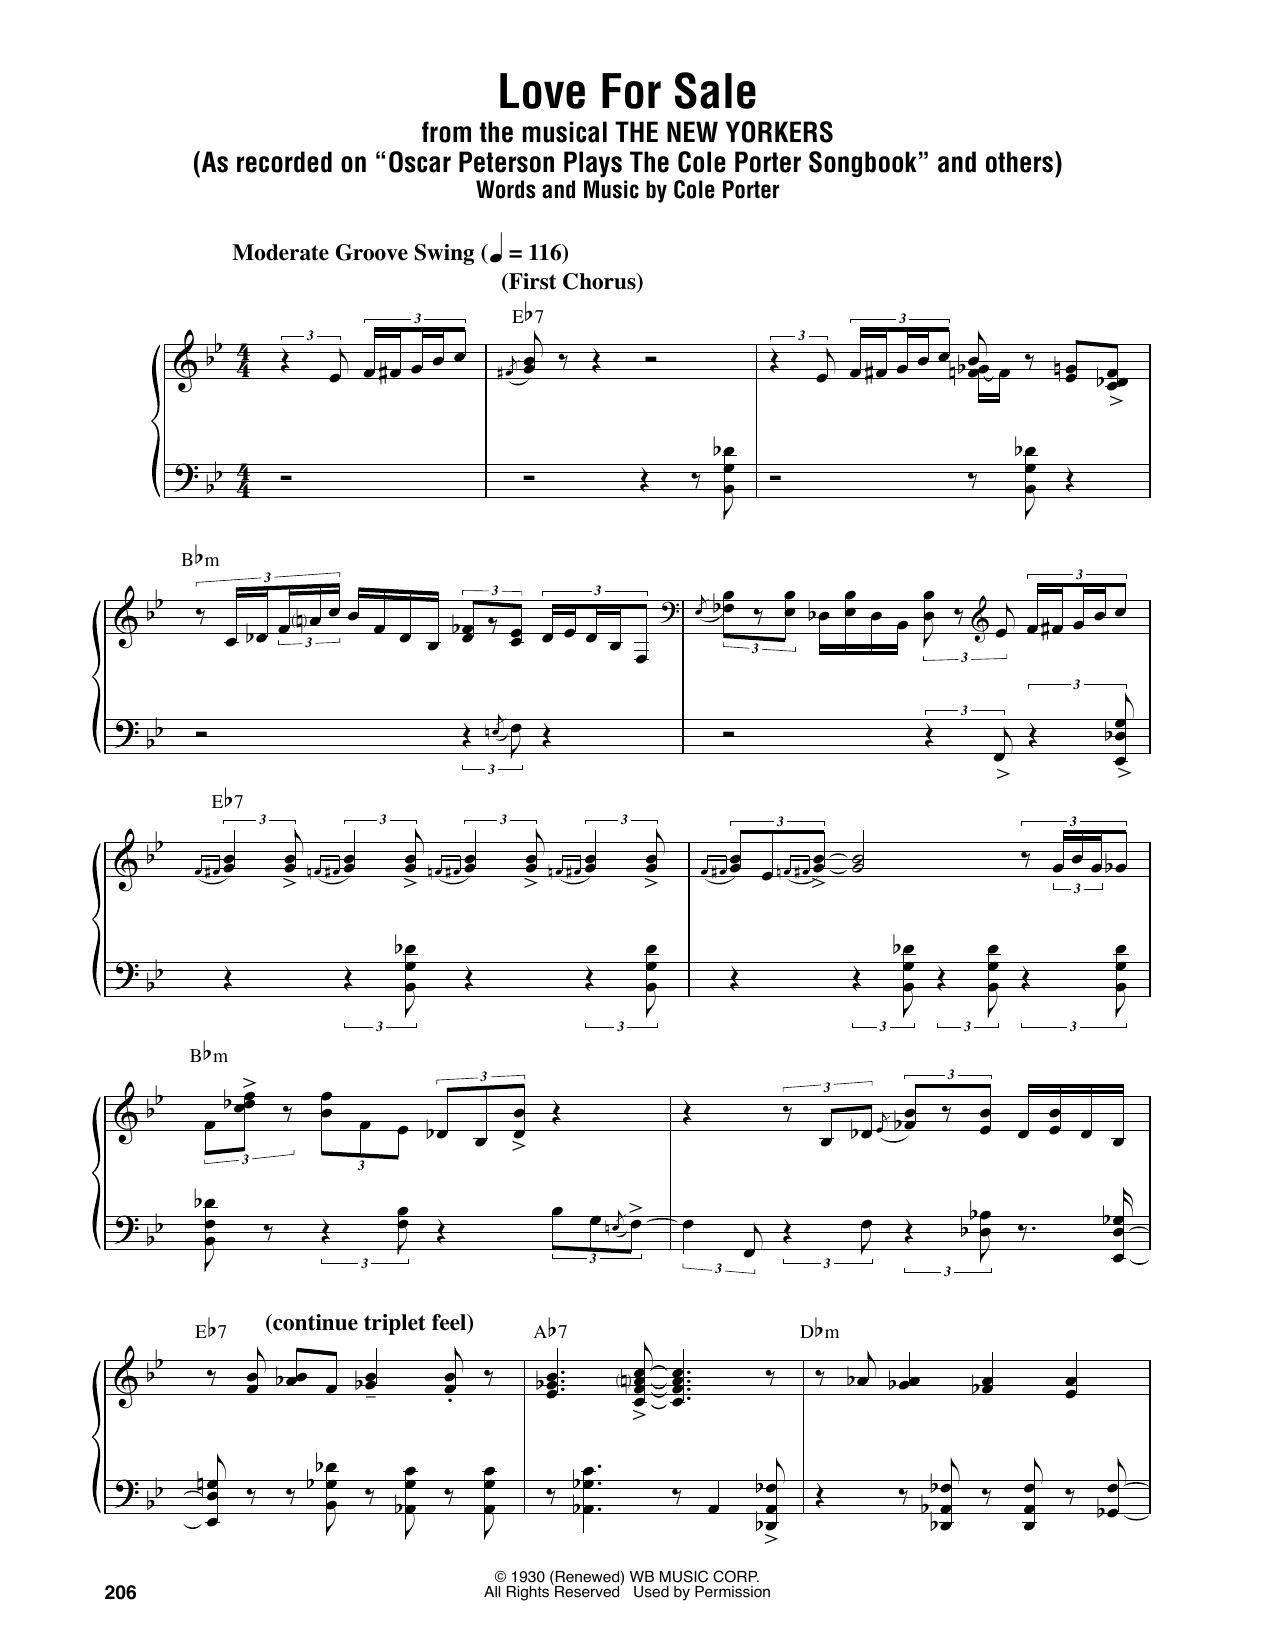 Download Oscar Peterson Love For Sale Sheet Music